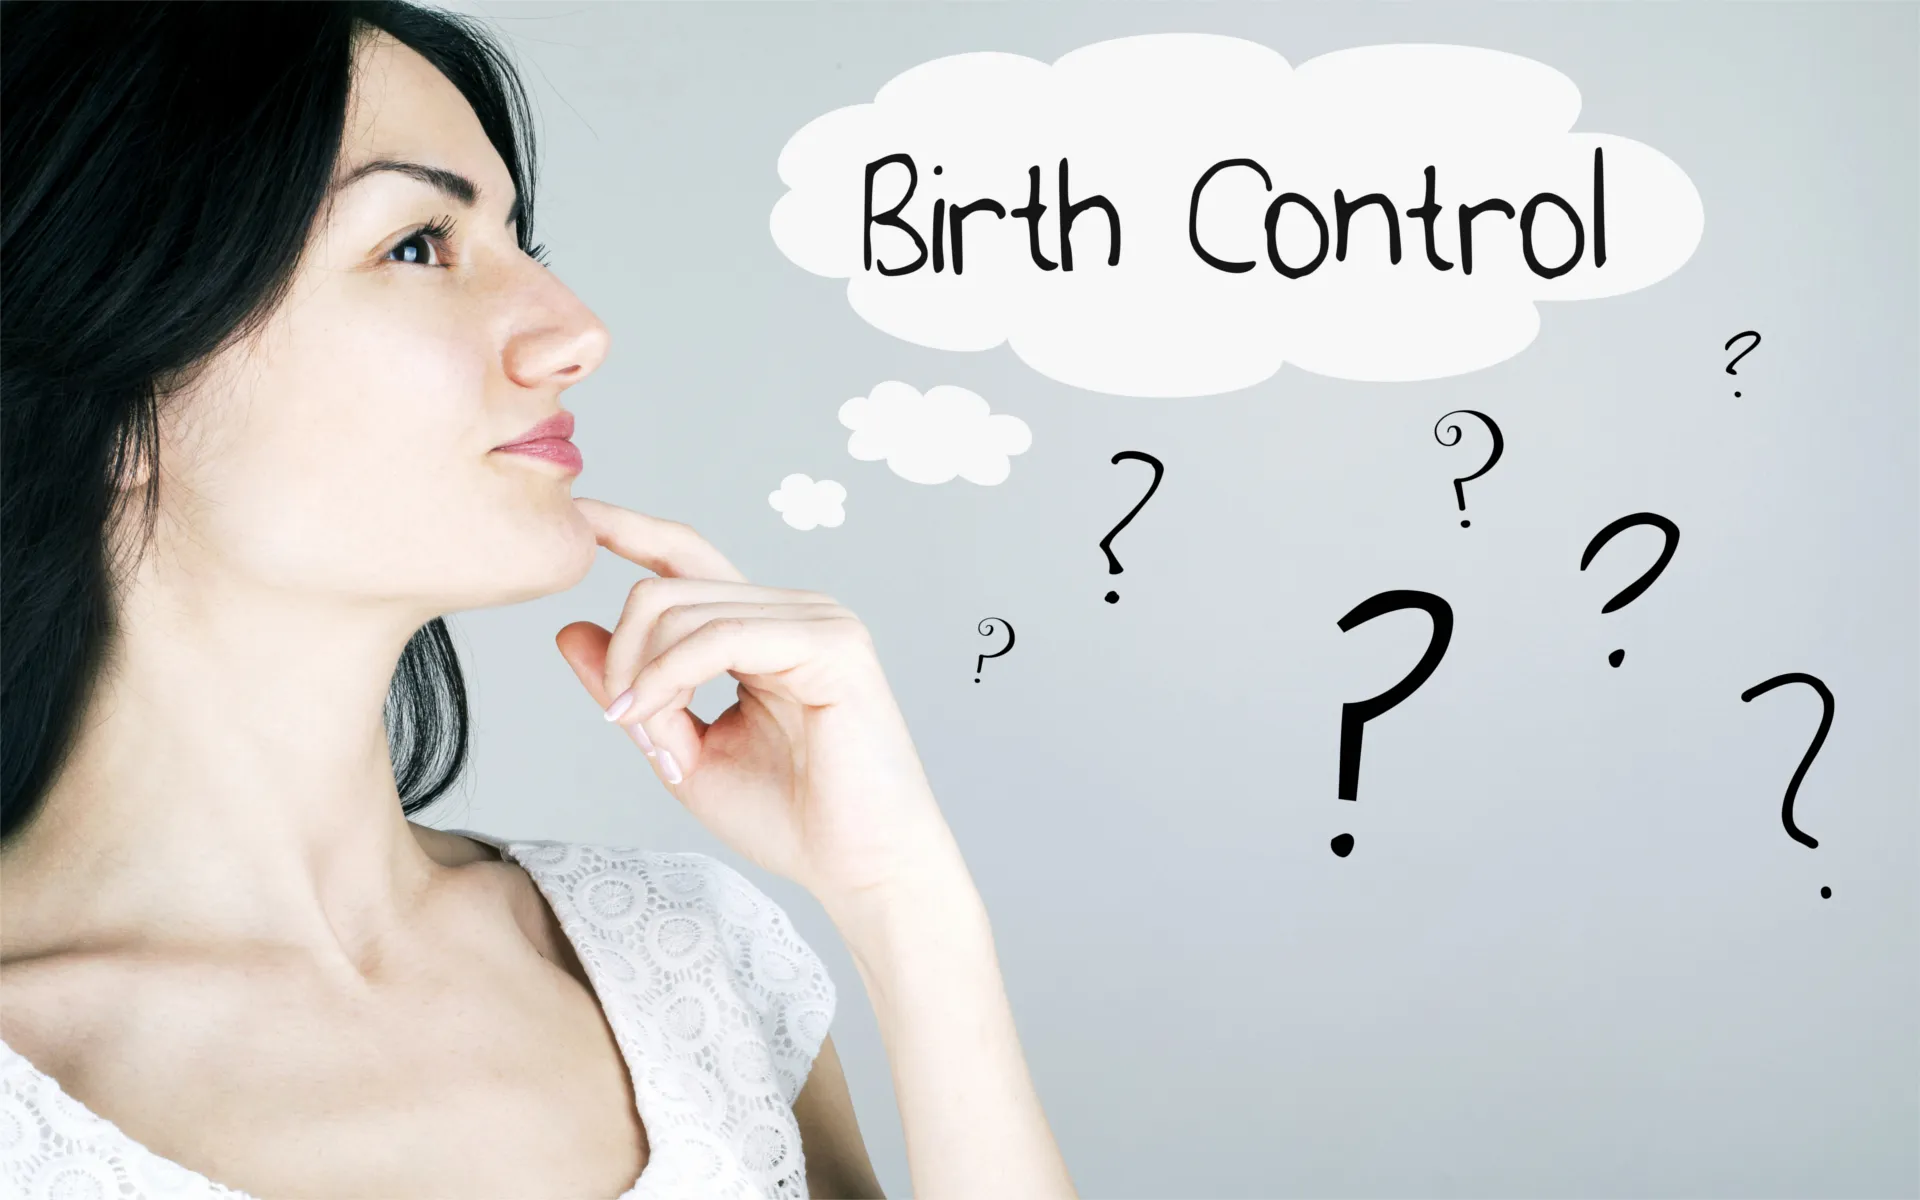 10 Birth Control Options for the Modern Woman